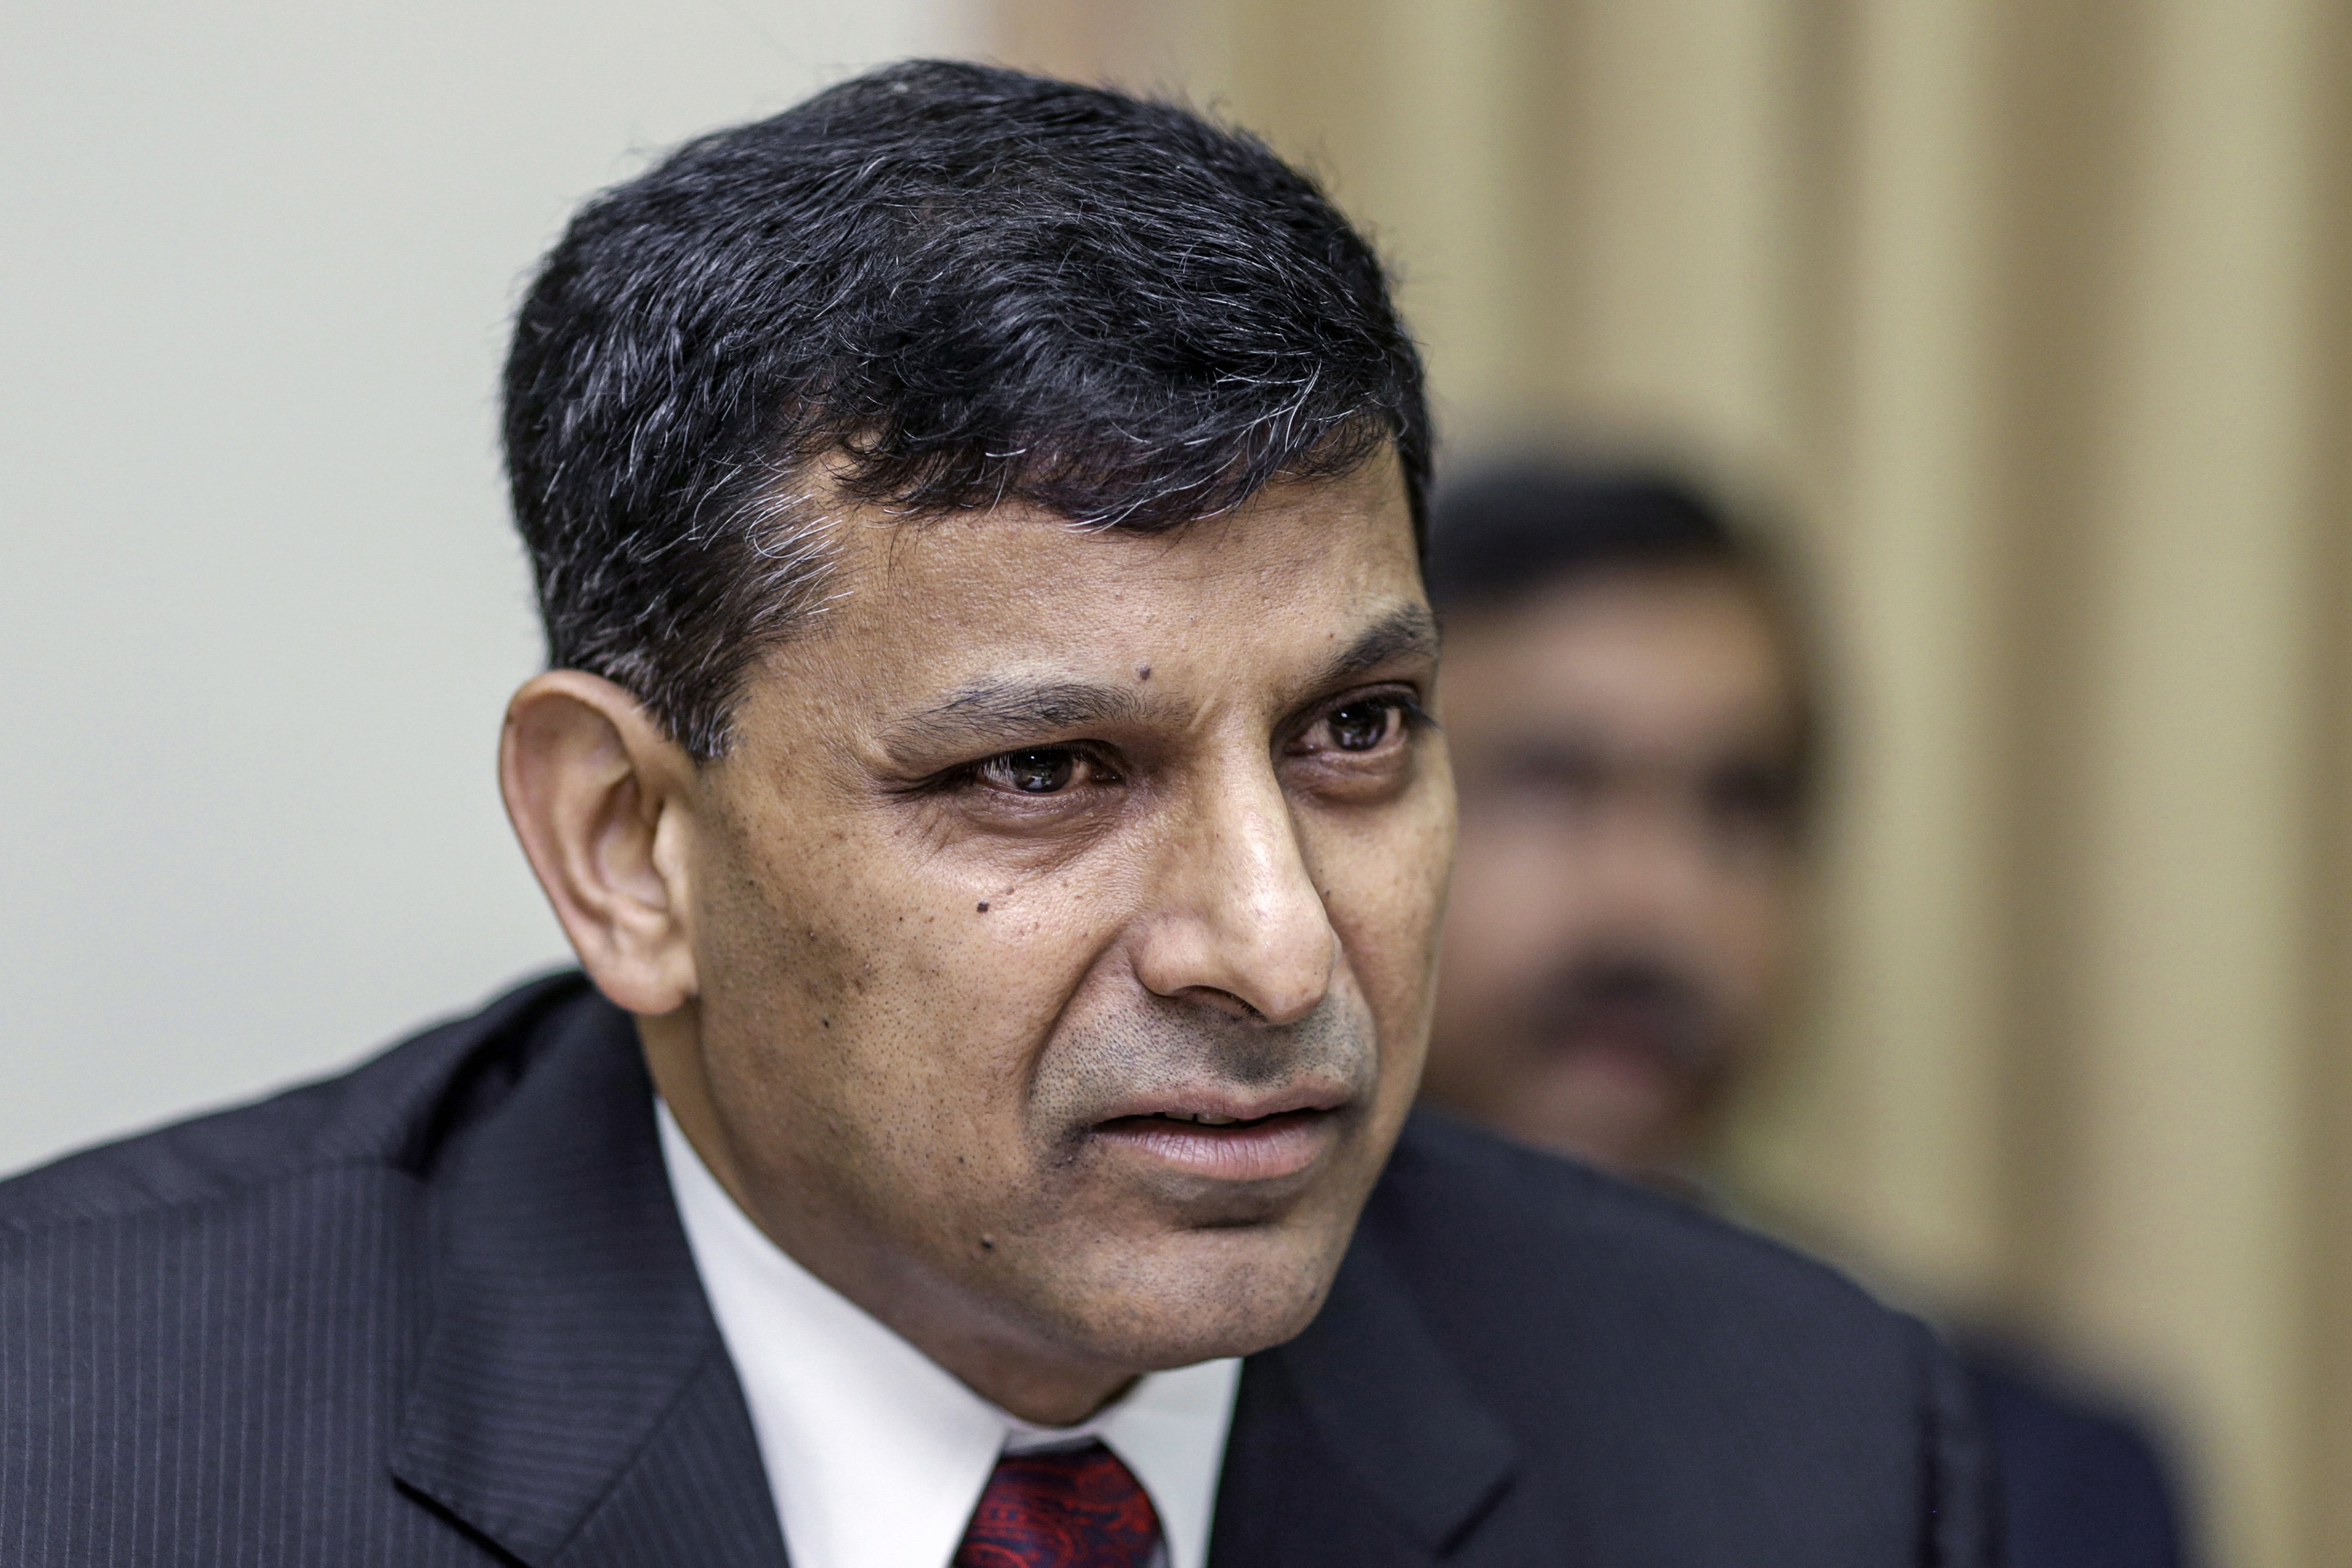 Raghuram Rajan, governor of the Reserve Bank of India, speaks during a news conference at the central bank's headquarters in Mumbai on August 5, 2014 (Bloomberg/Getty Images)